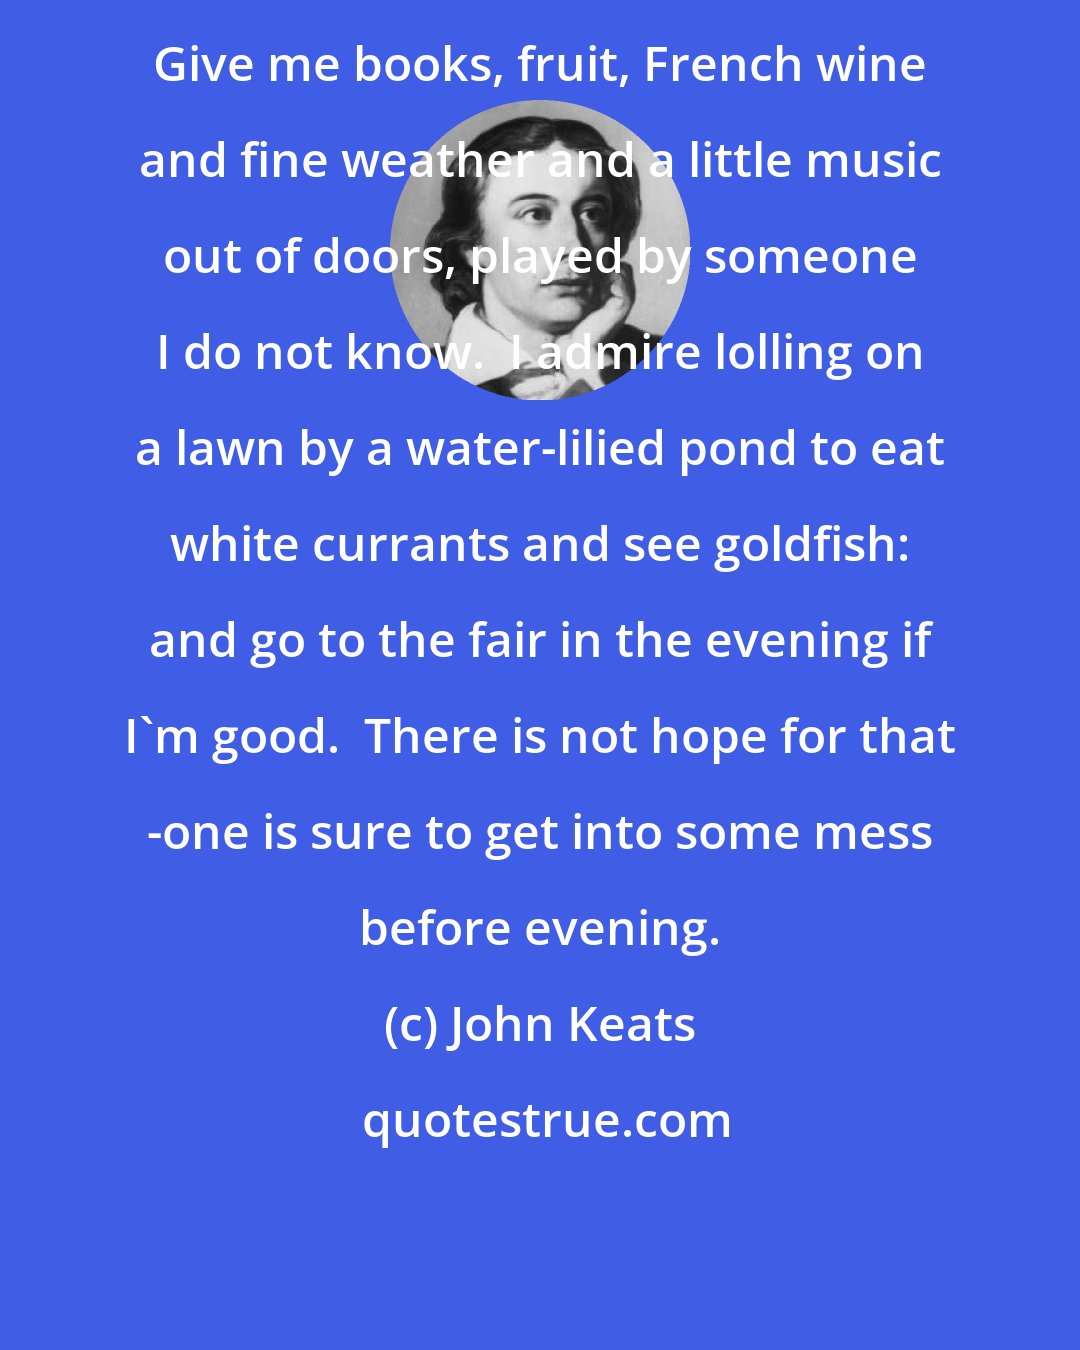 John Keats: Give me books, fruit, French wine and fine weather and a little music out of doors, played by someone I do not know.  I admire lolling on a lawn by a water-lilied pond to eat white currants and see goldfish: and go to the fair in the evening if I'm good.  There is not hope for that -one is sure to get into some mess before evening.